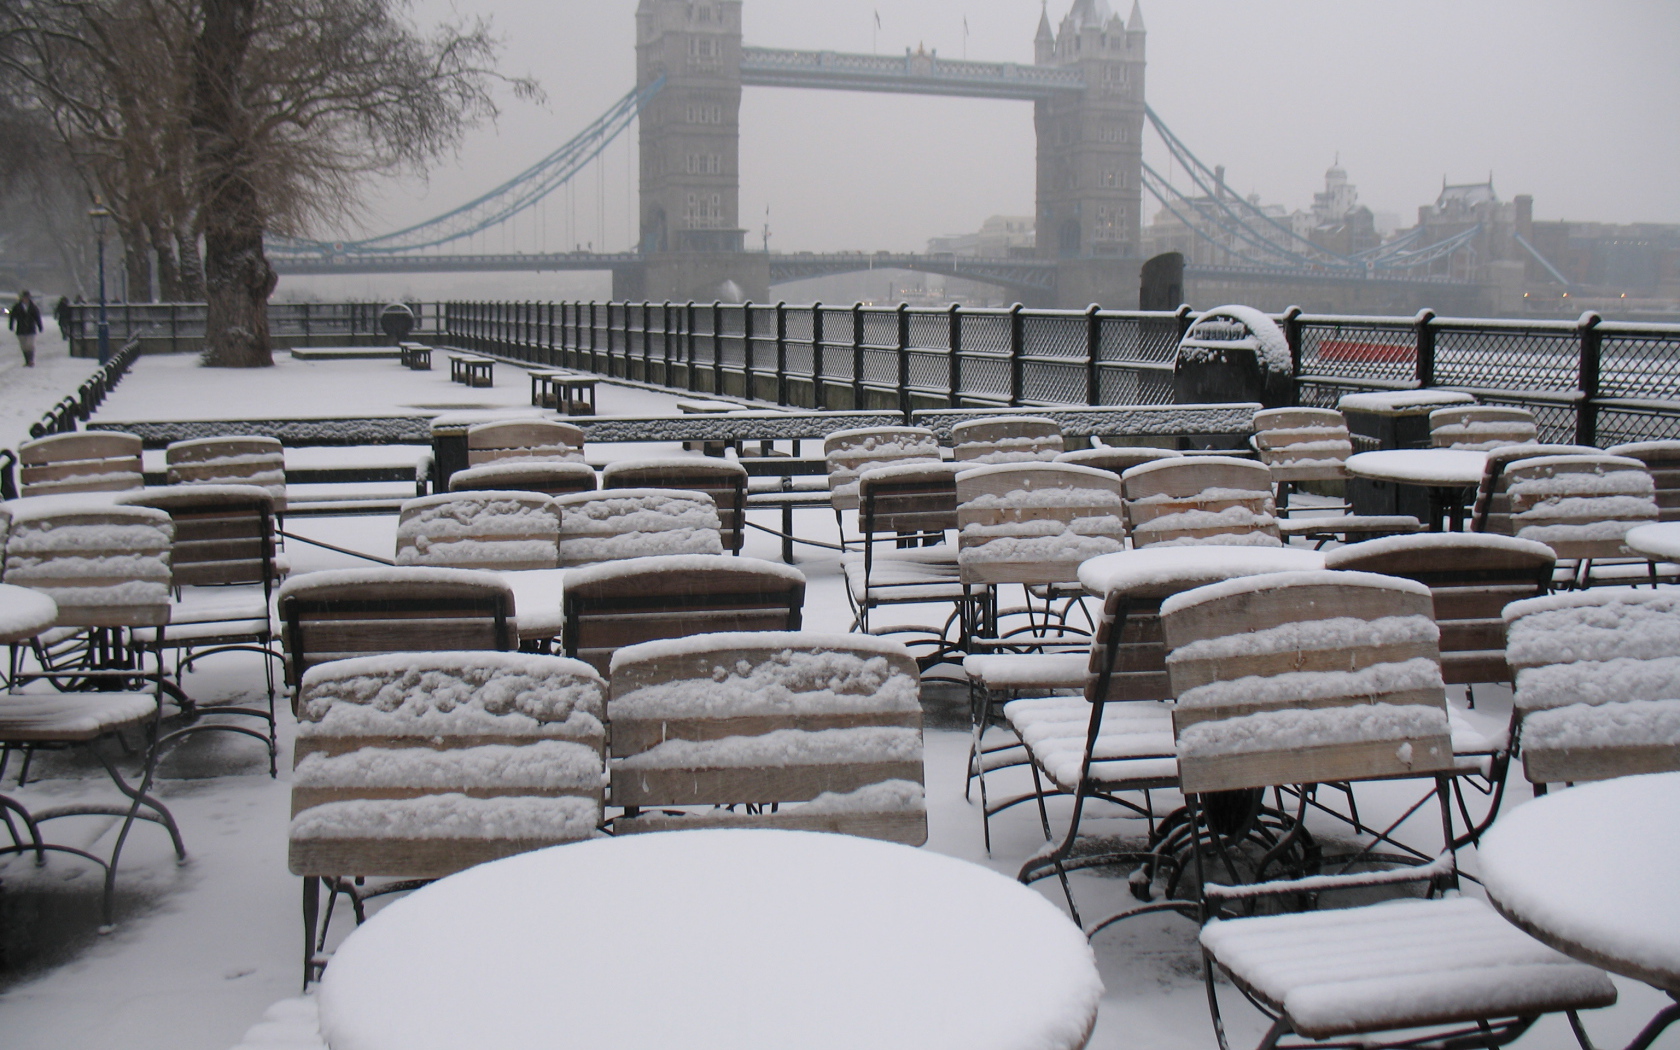 Snow in London cafe